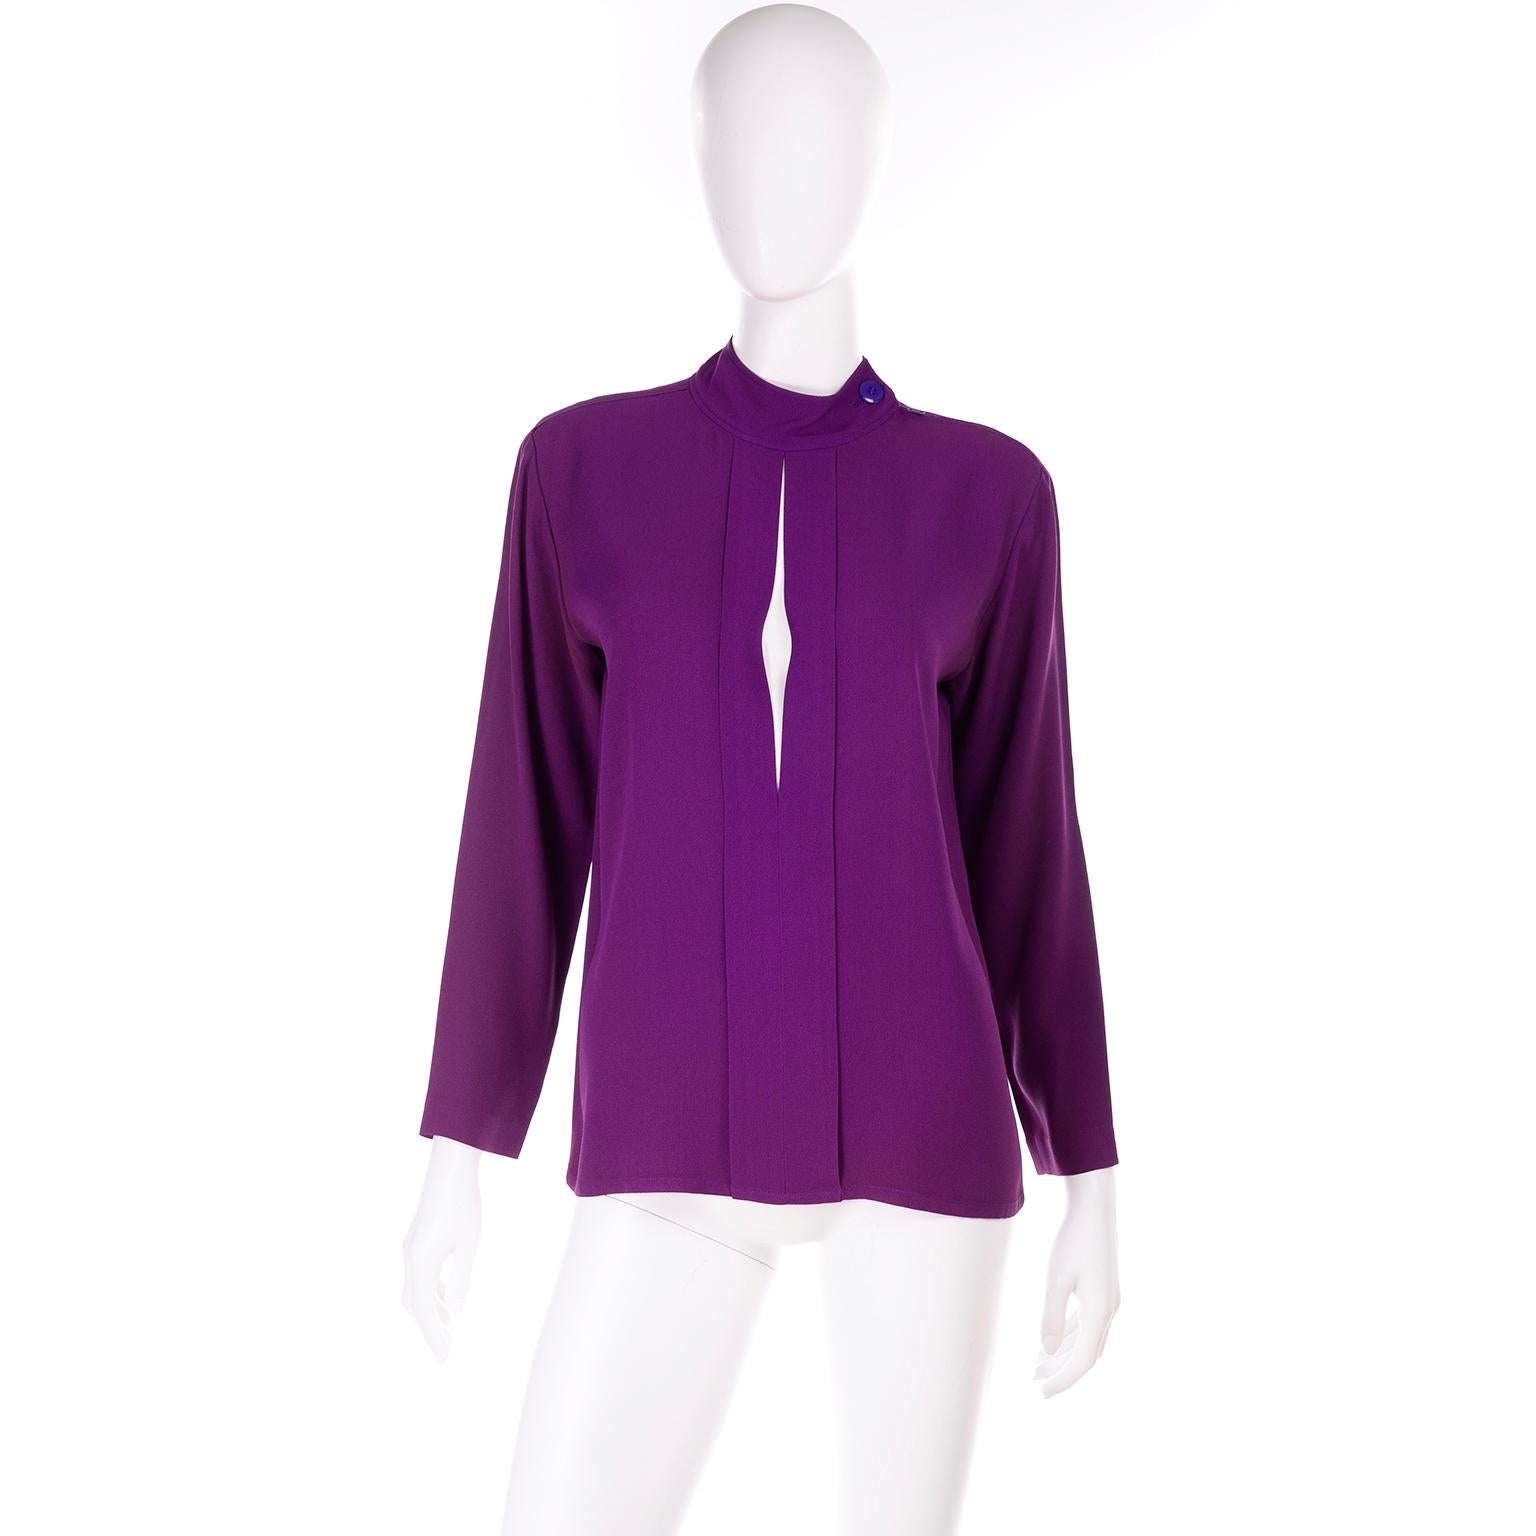 This vintage Yves Saint Laurent purple silk crepe top has a diamond cutout in the front with a buttoned high neck.  This long sleeve blouse was made in France and is labeled size 36. There is a metal zipper on the right shoulder with button at the